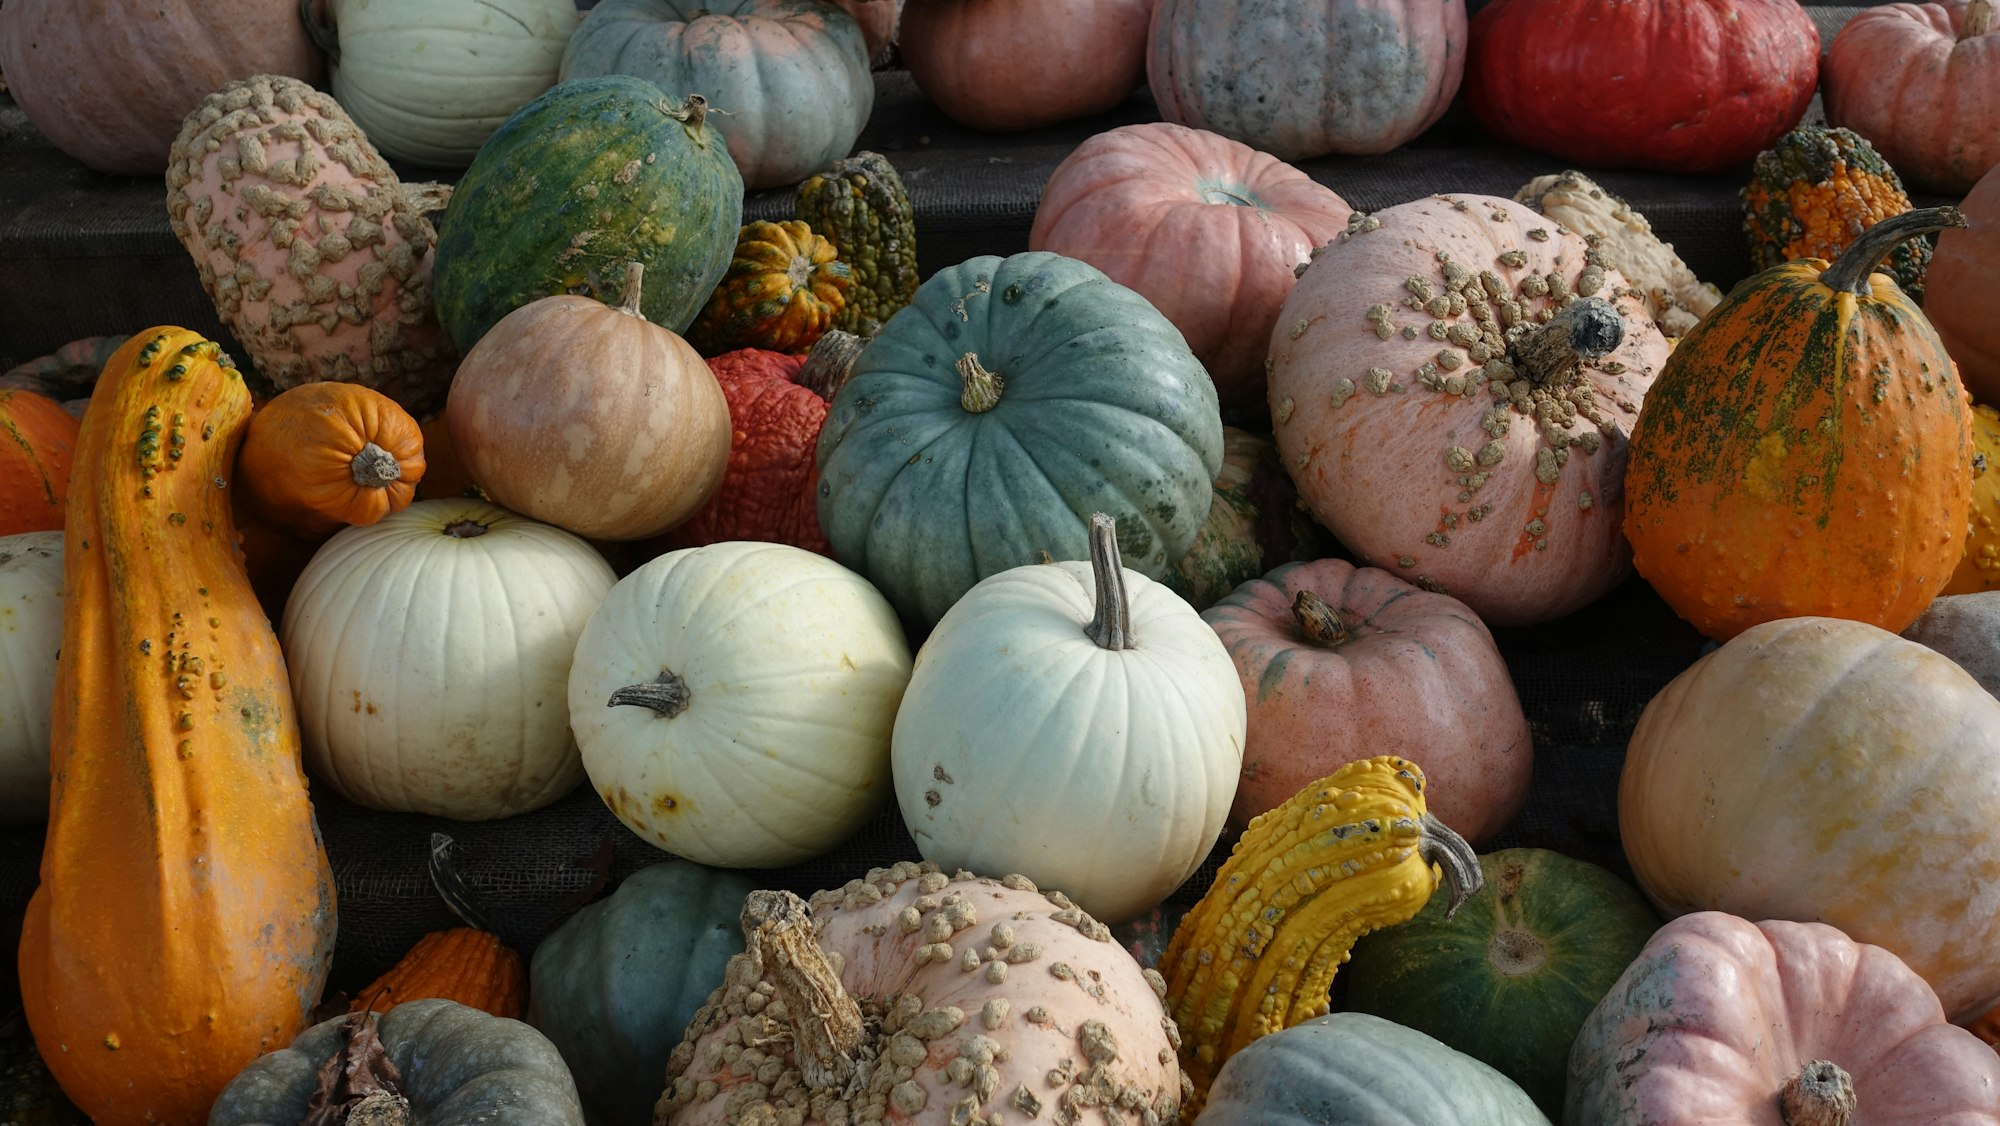 Pumpkins, gourds on display at a local market.